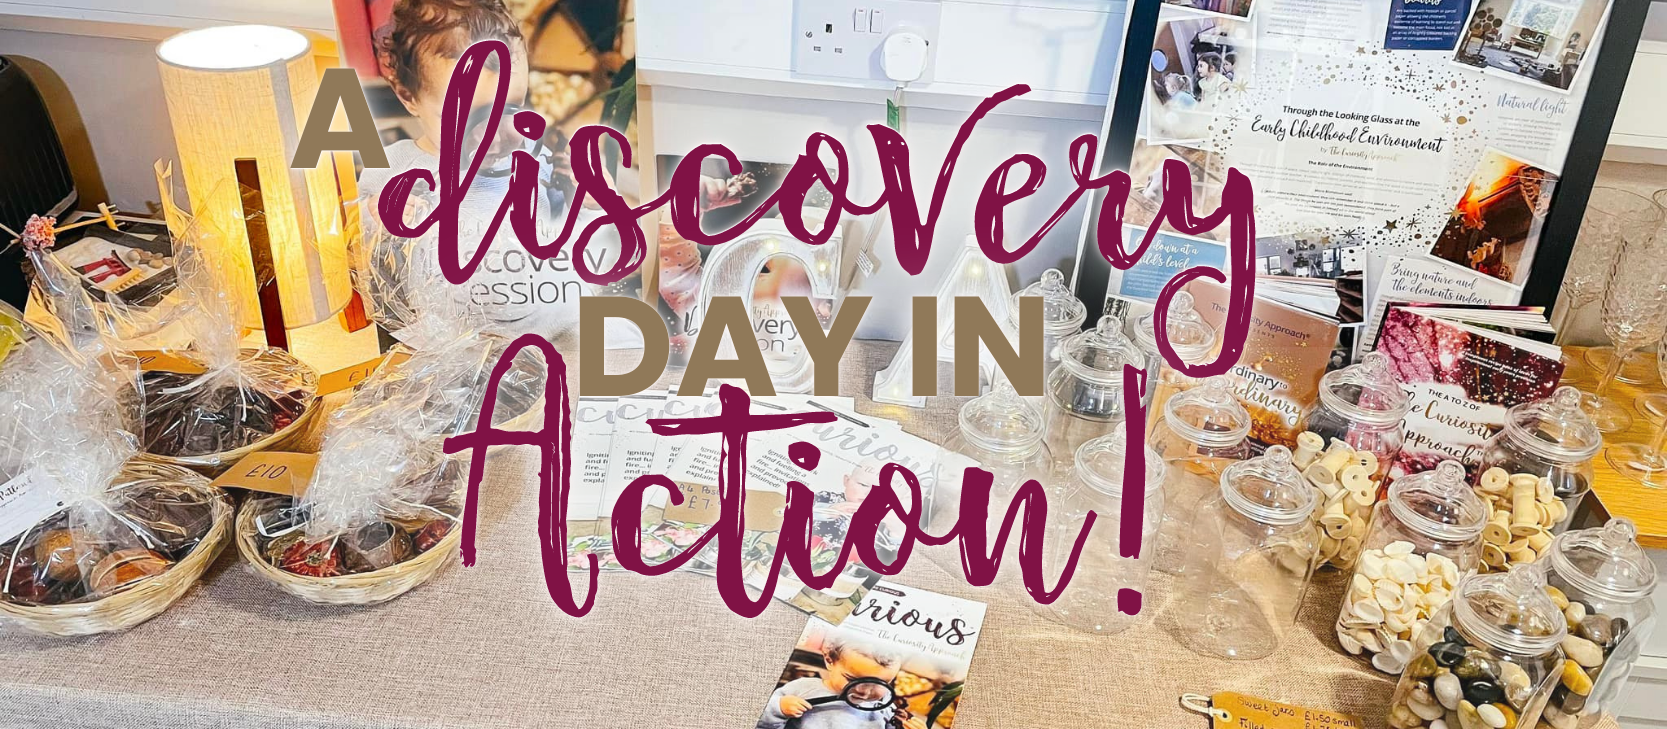 South & East Sussex - A Discovery Day In Action! - 7/10/22